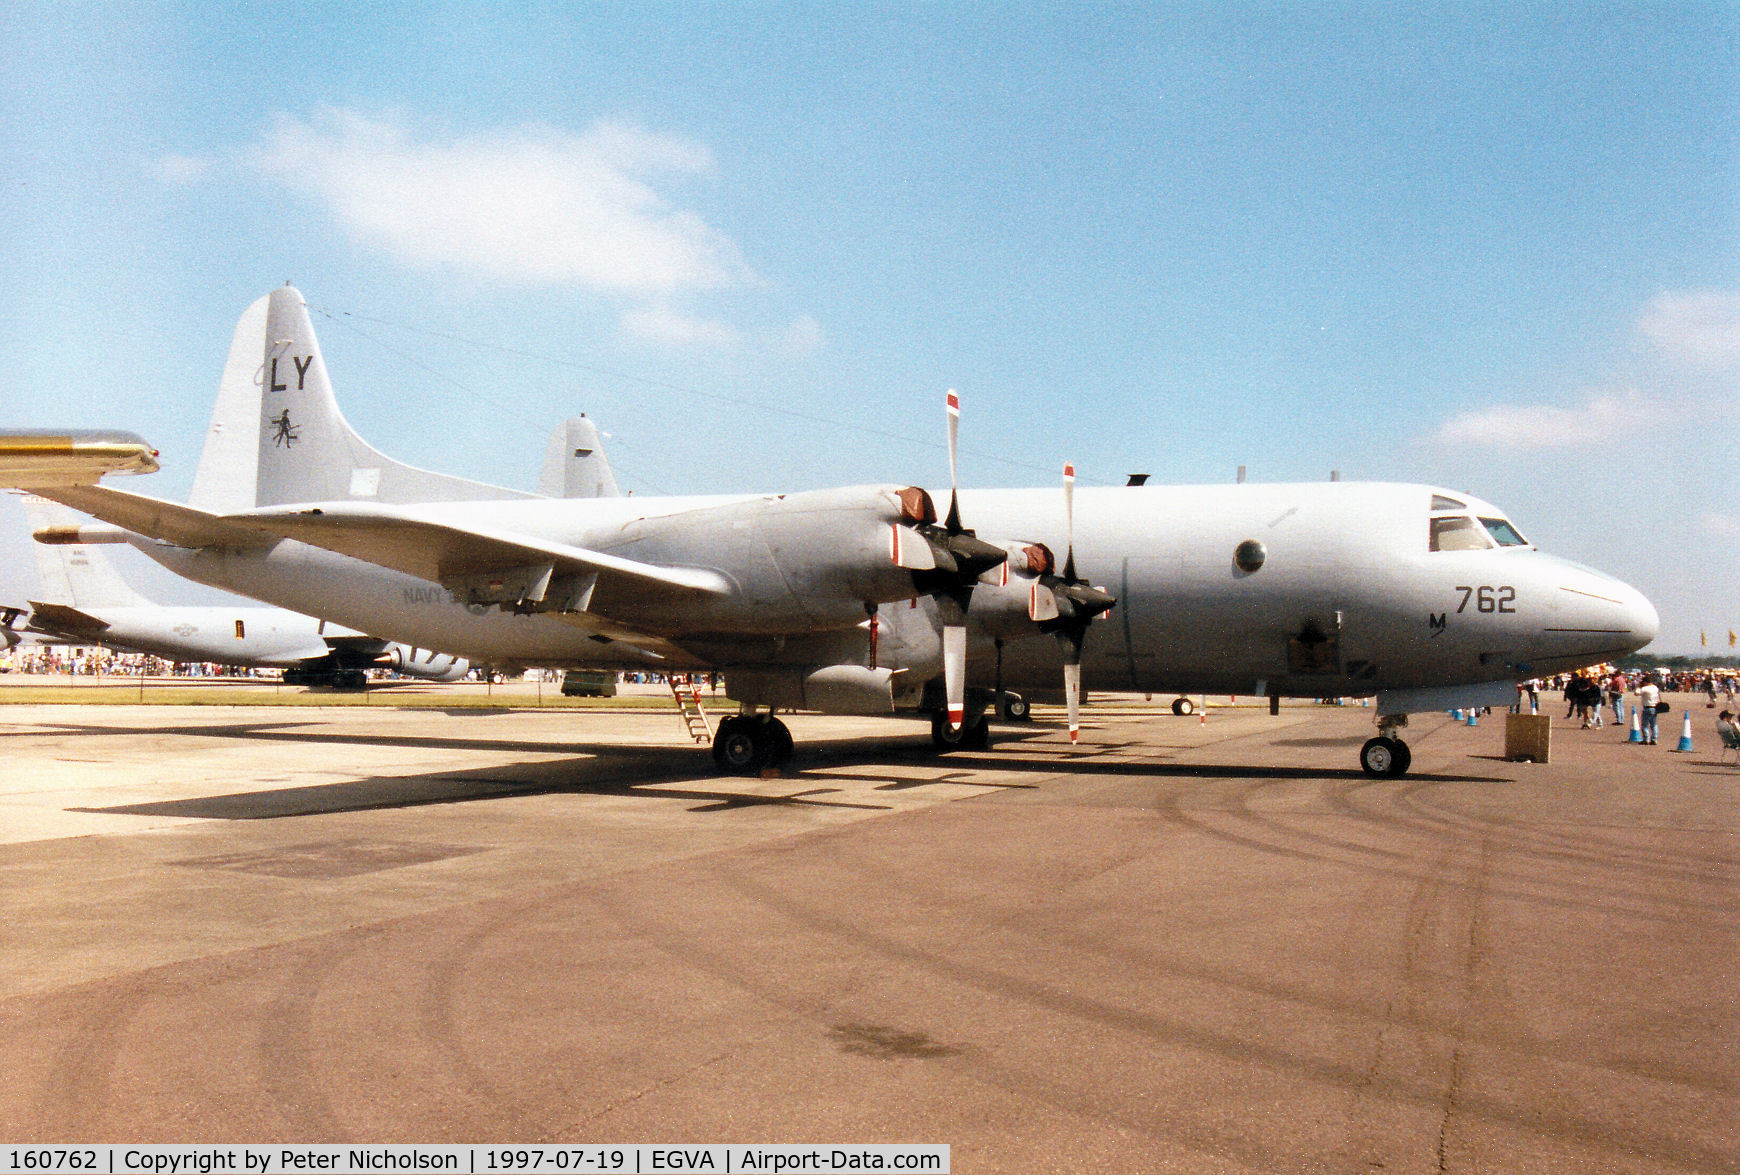 160762, Lockheed P-3C Orion C/N 285A-5671, P-3C Orion, callsign Navy Lima Yankee 925, of Patrol Squadron VP-92 on display at the 1997 Intnl Air Tattoo at RAF Fairford.